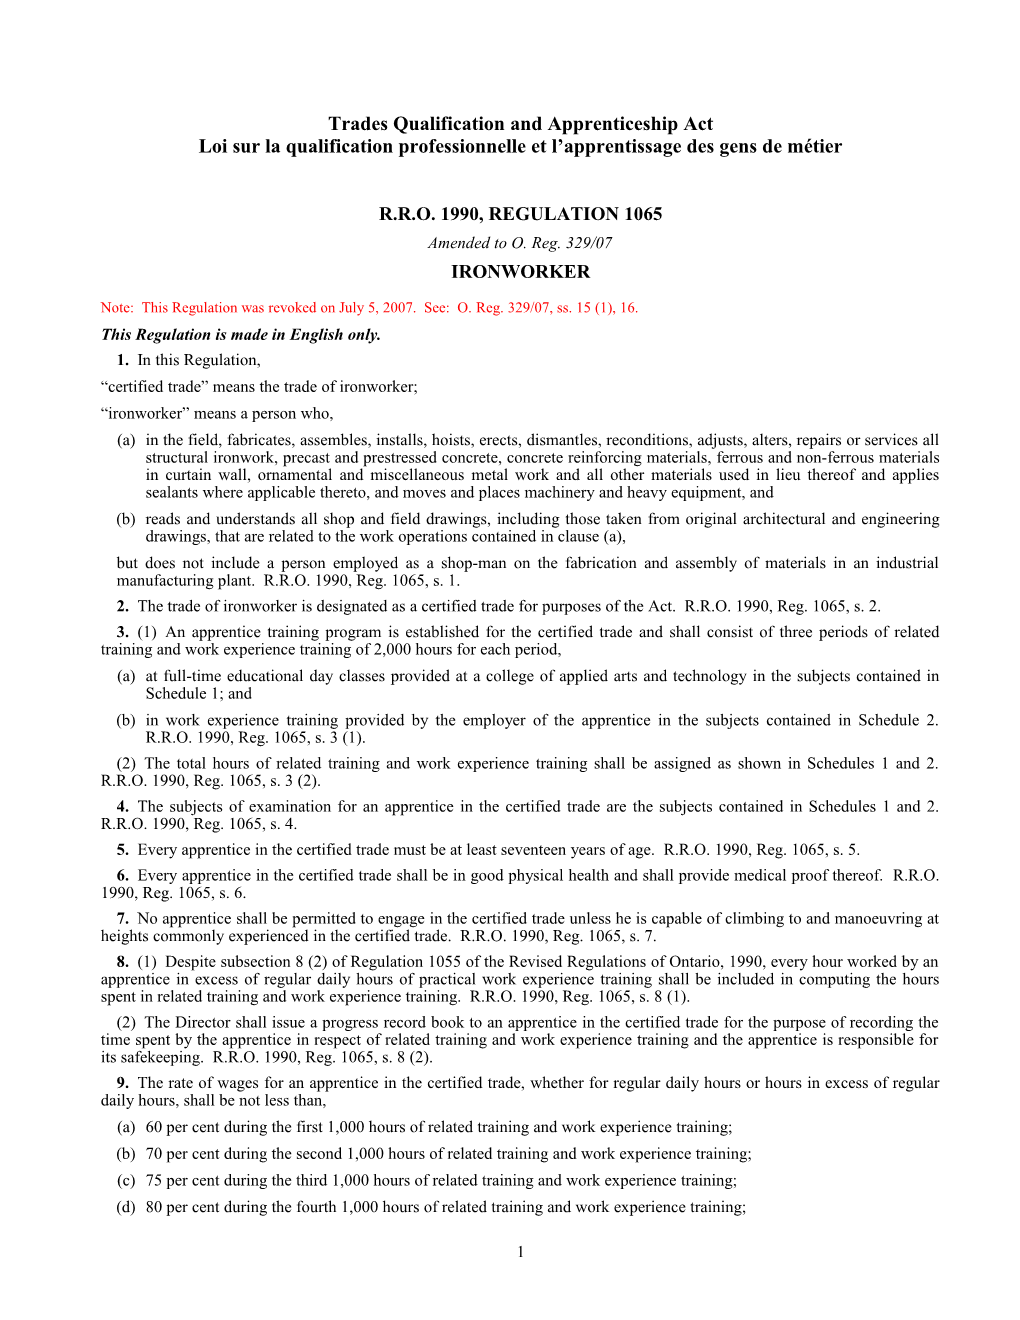 Trades Qualification and Apprenticeship Act - R.R.O. 1990, Reg. 1065